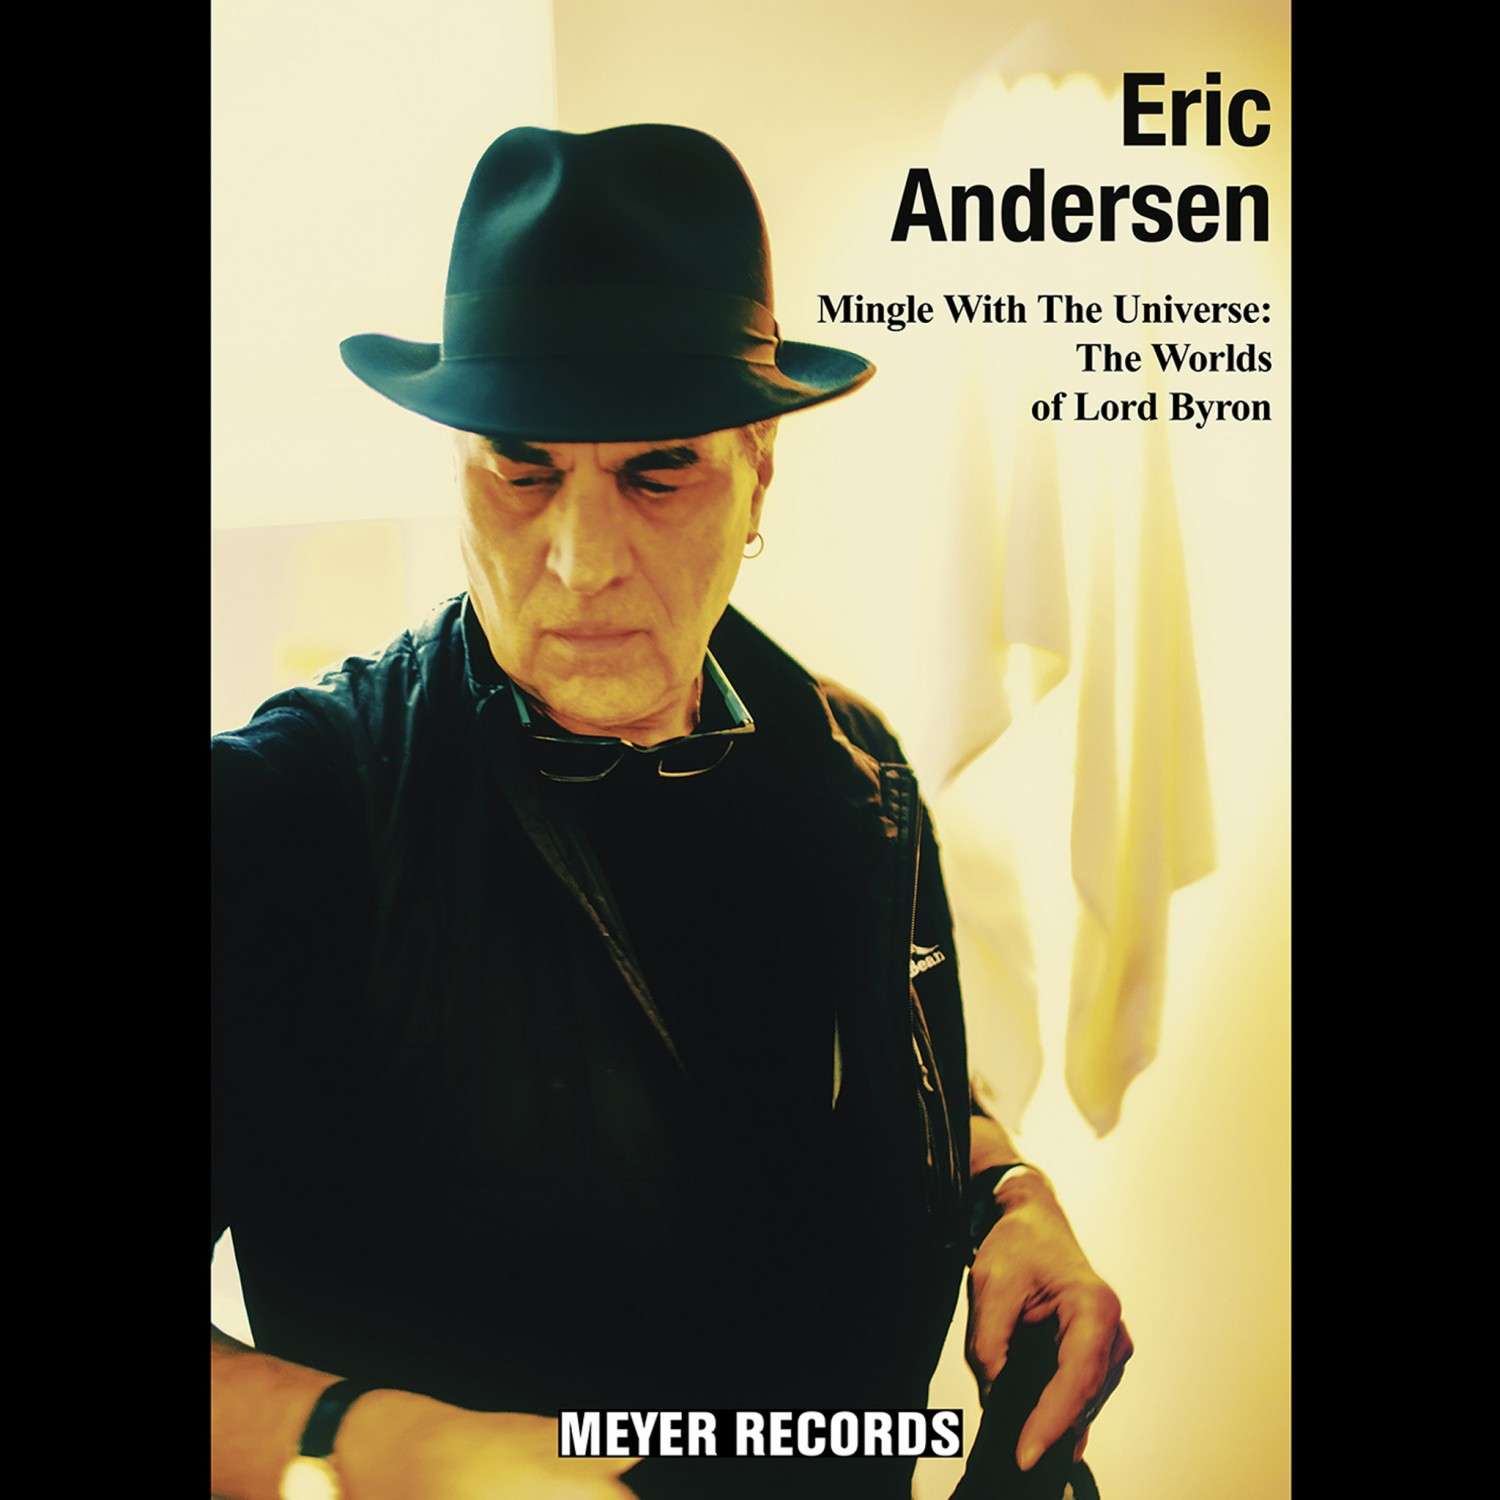 Schallplatte Eric Andersen - Mingle with the Universe: The Worlds of Lord Byron (Meyer Records) im Test, Bild 2